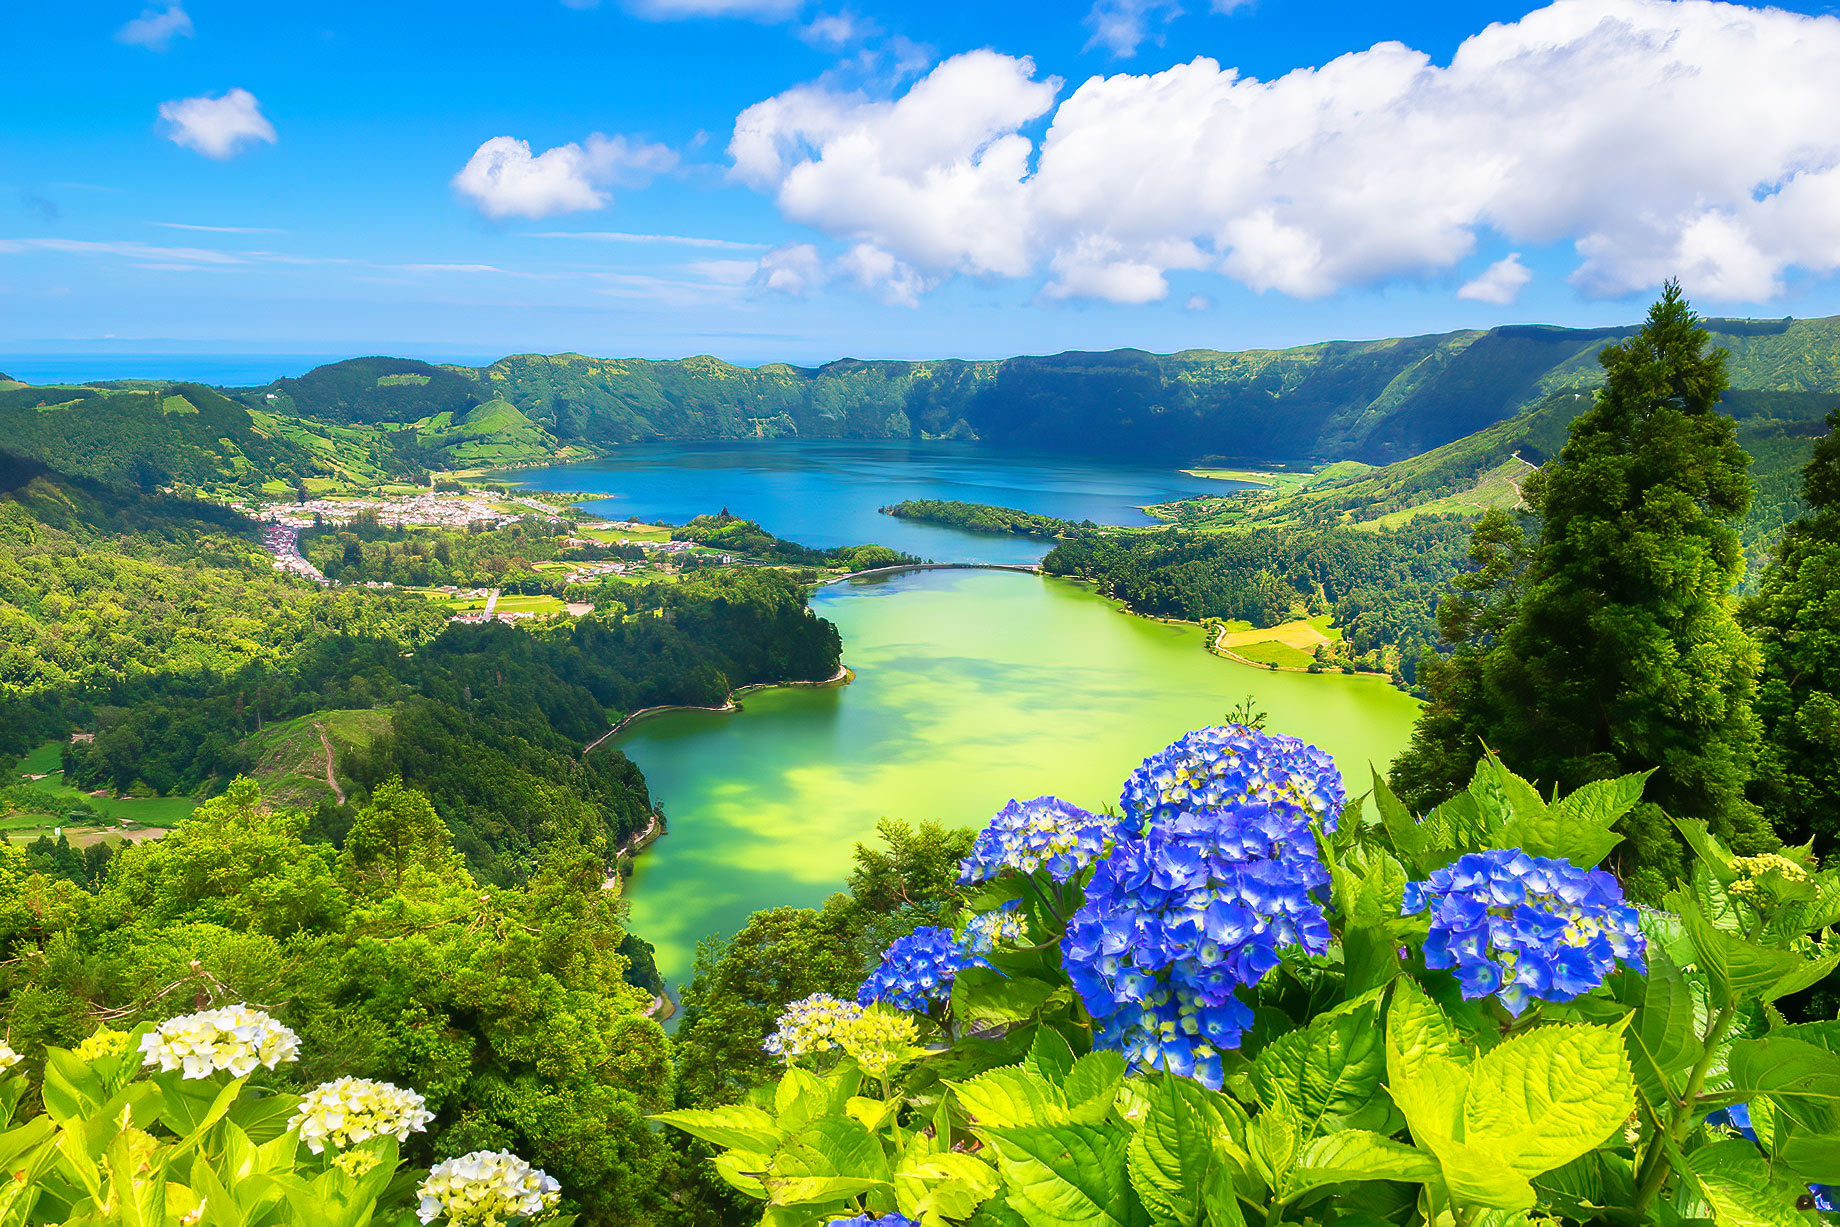 Beautiful View of Seven Cities Lake "Lagoa das Sete Cidades" From Vista do Rei Viewpoint In Sao Miguel Island - Azores - Portugal